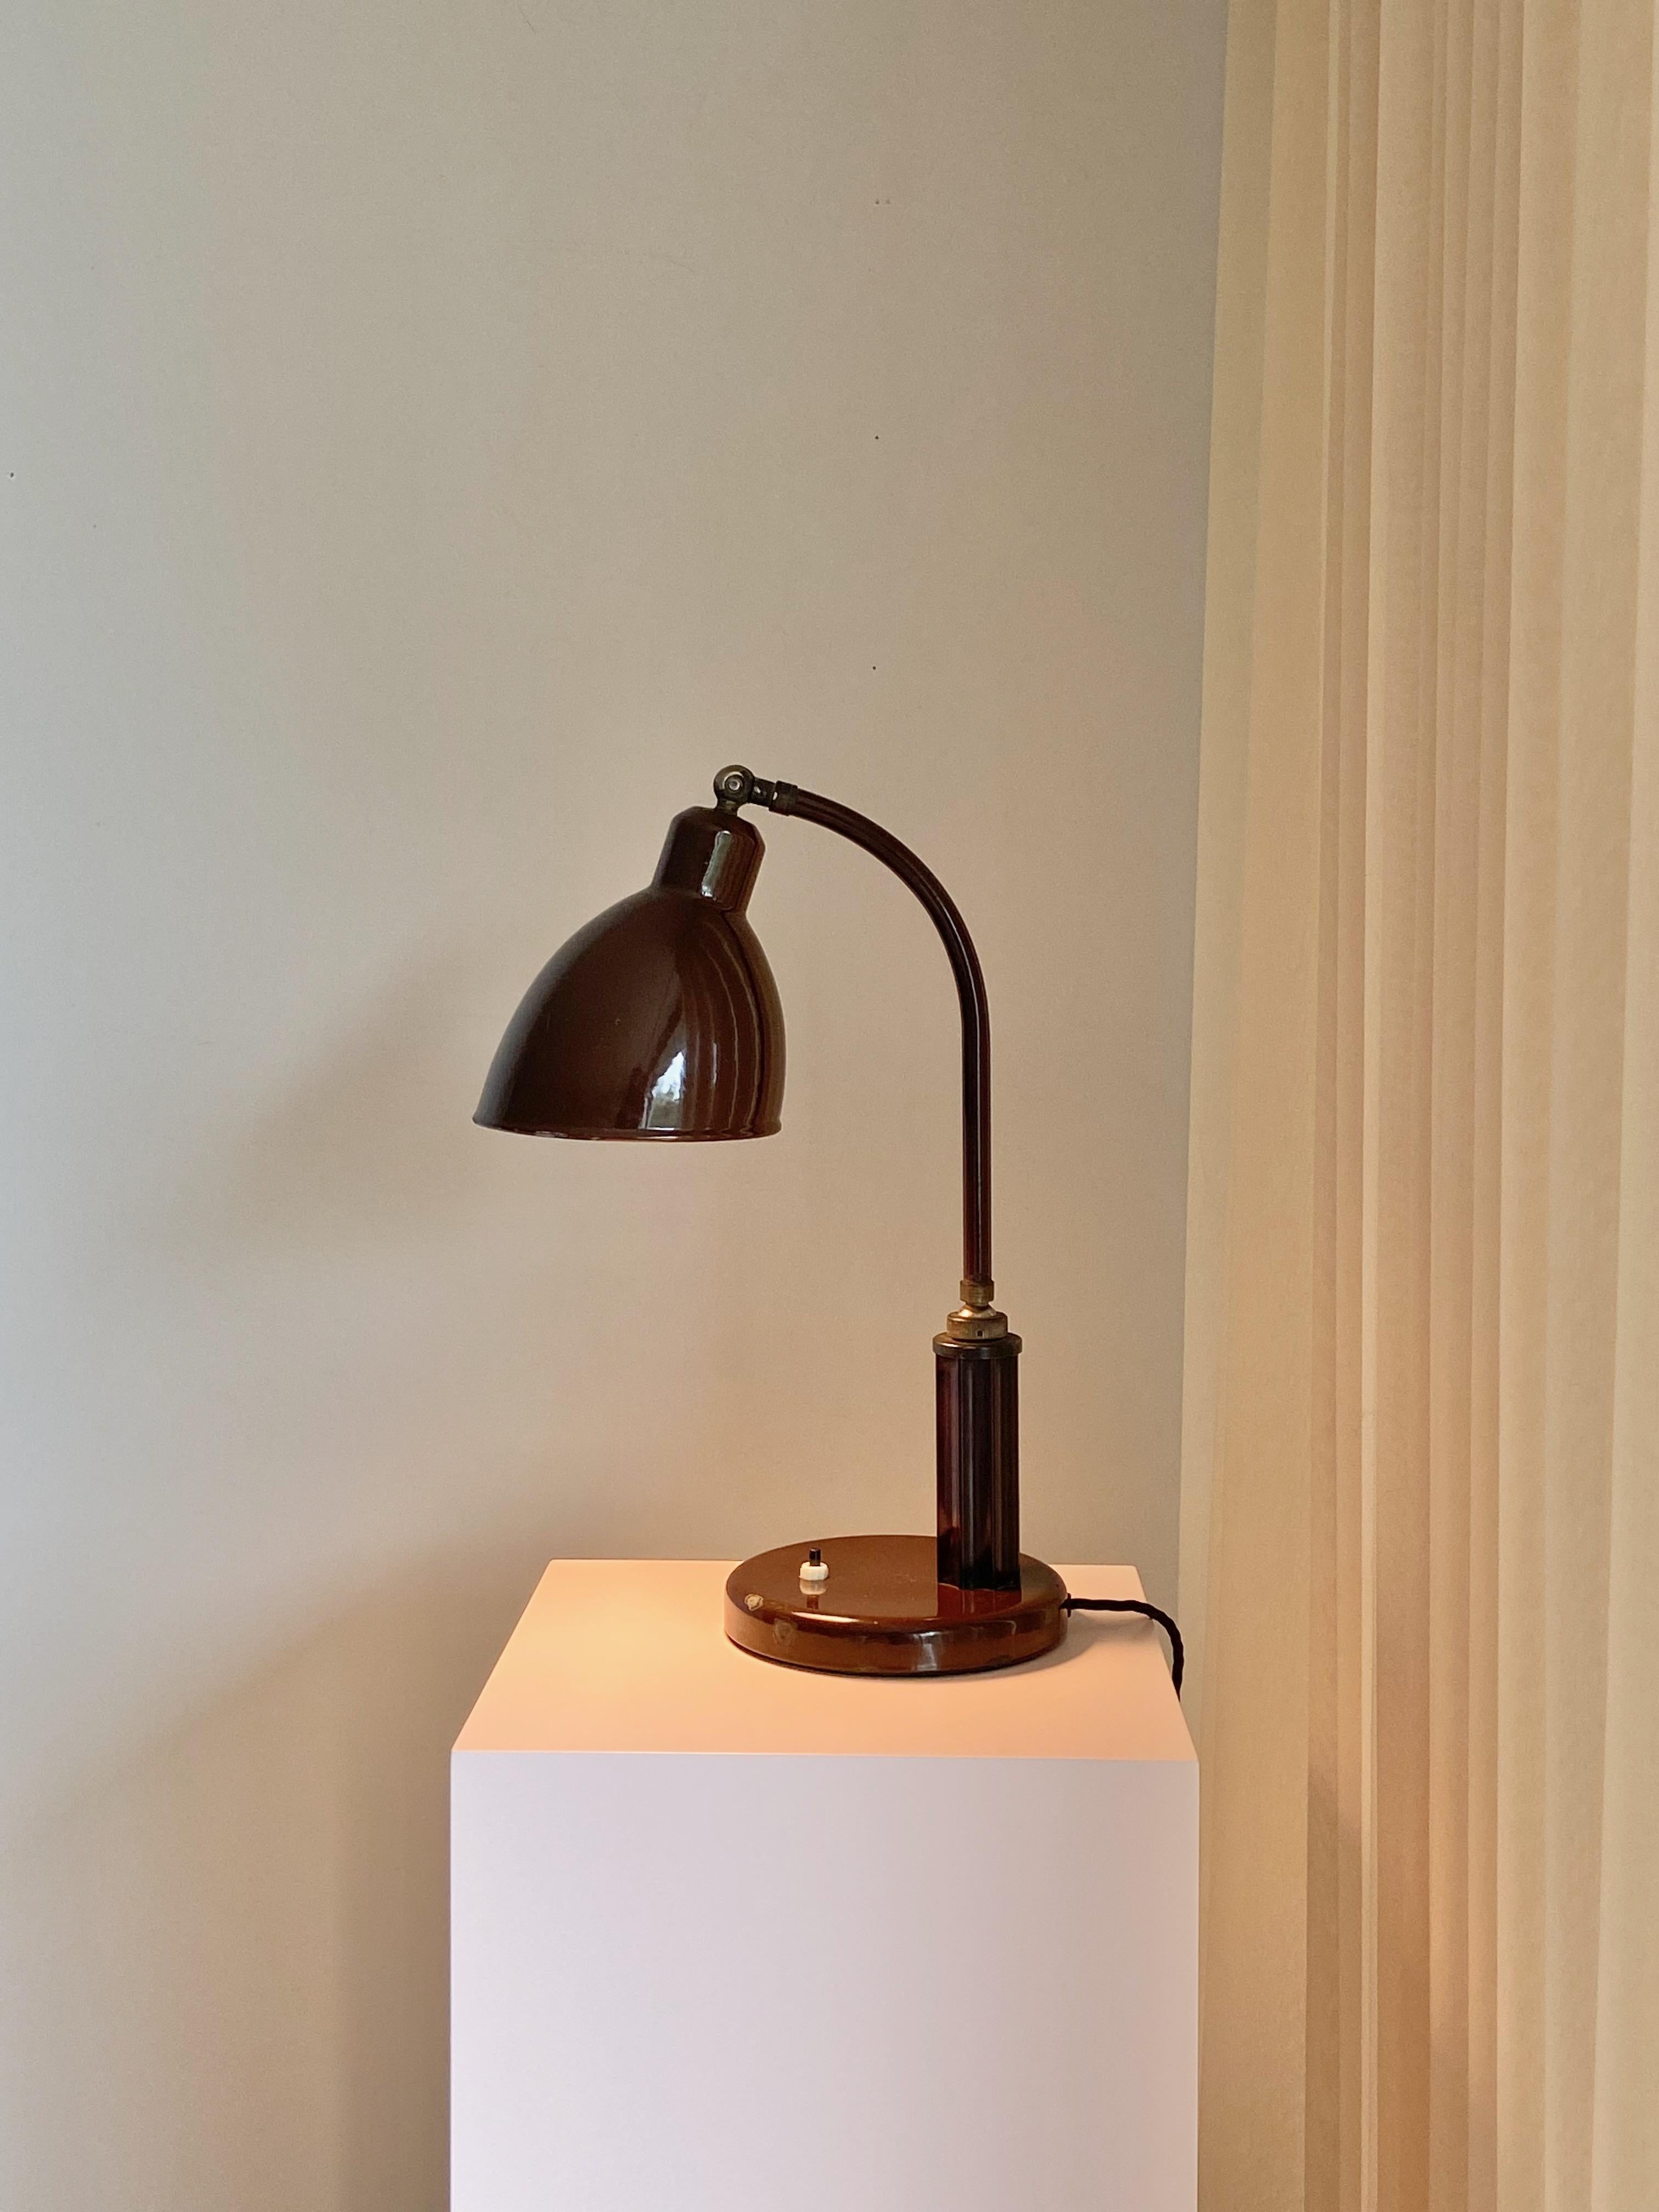 Molitor Grapholux Lamp Brown Enamel and Bakelite Stick by Christian Dell 1930s For Sale 6